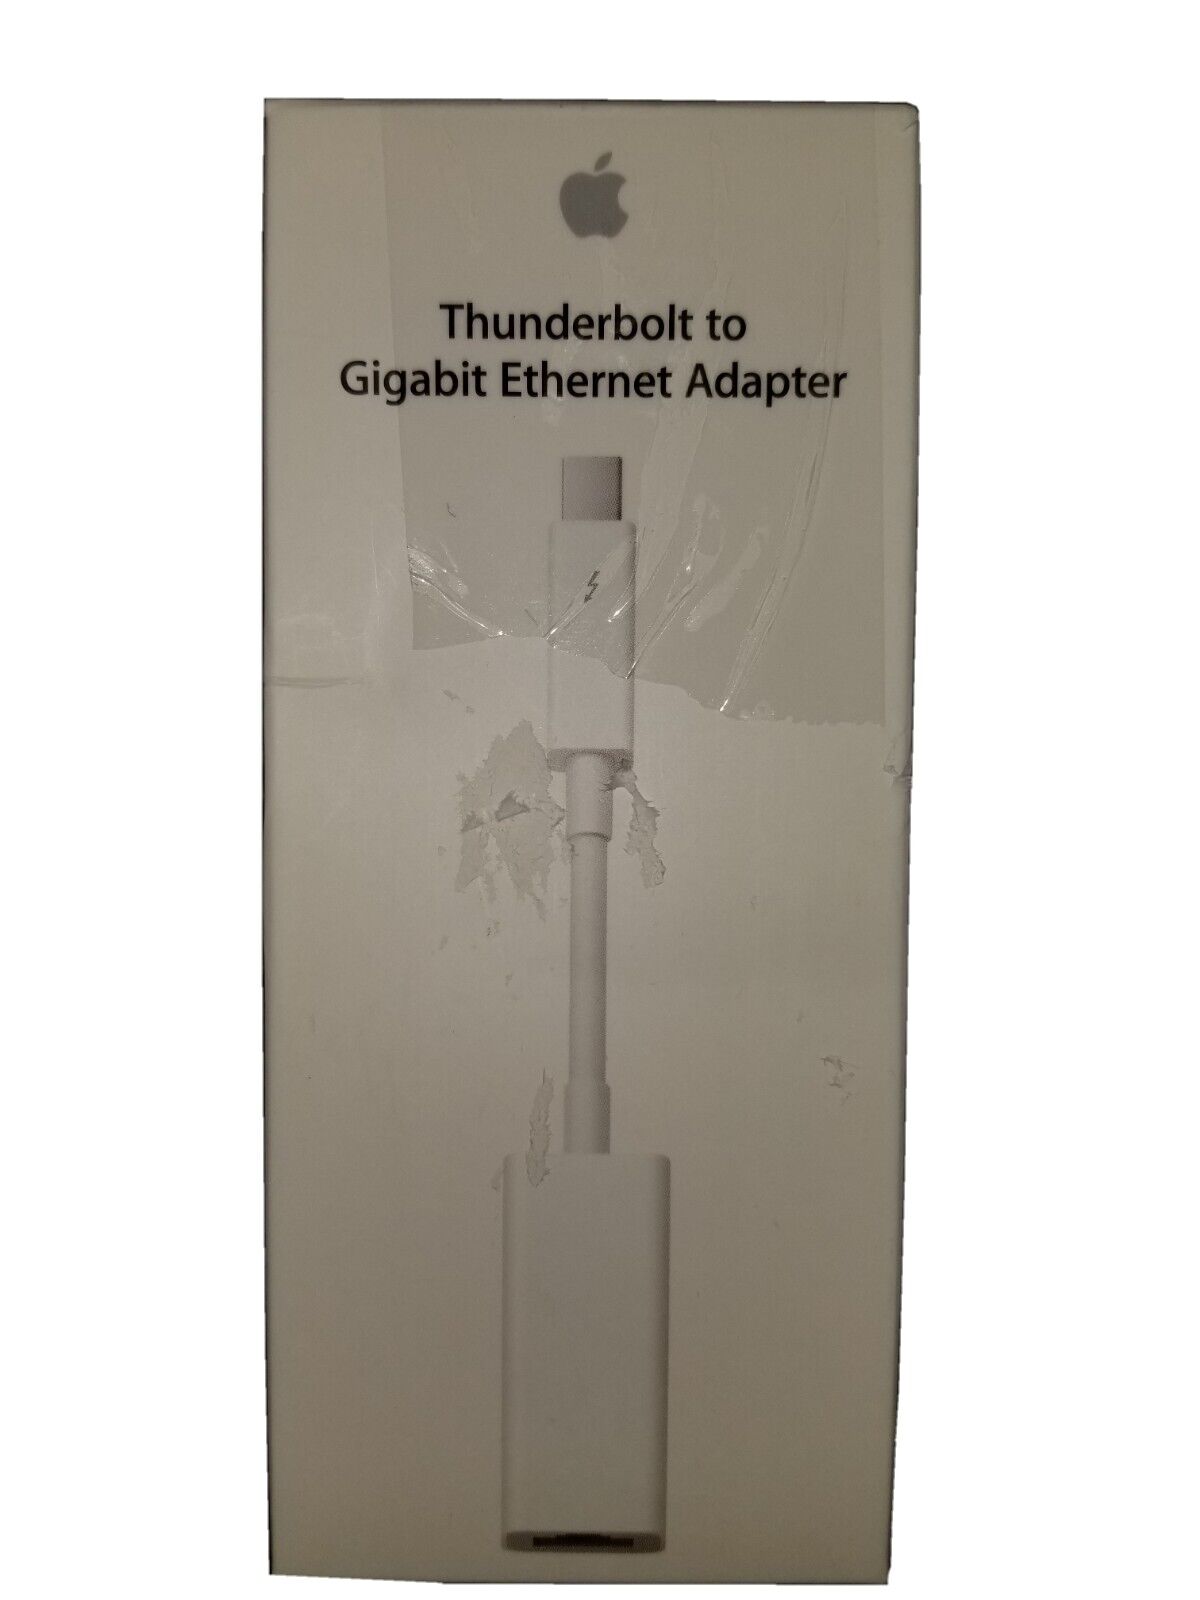 Apple A1433 Thunderbolt to Gigabit Ethernet Adapter - MD463LL/A